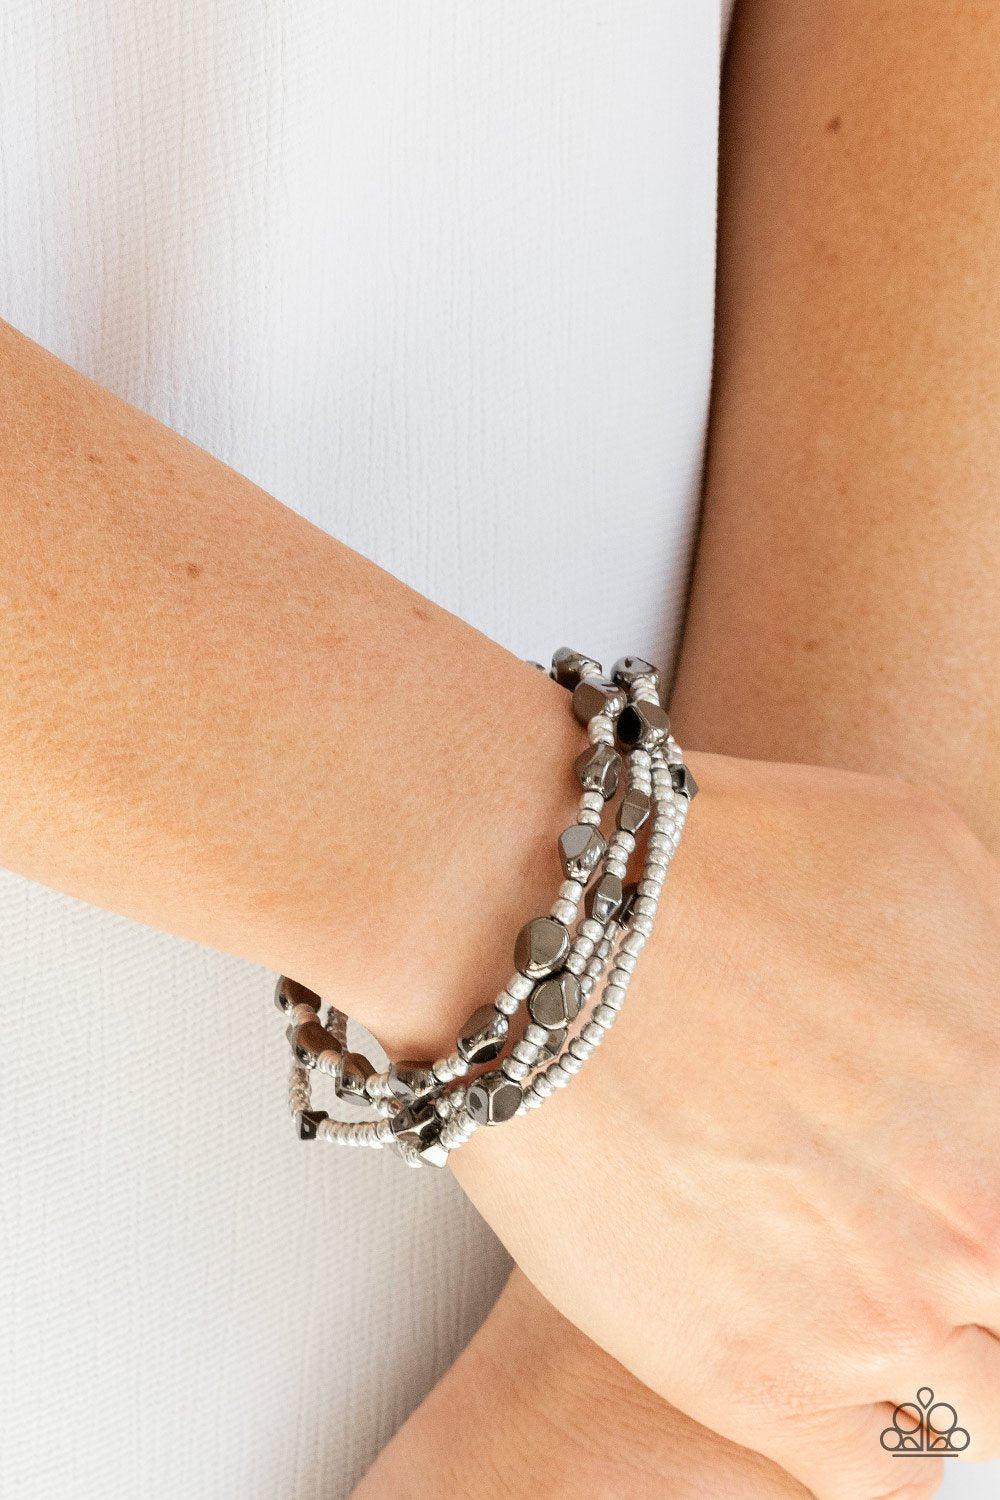 Fashionably Faceted Multi Silver and Gunmetal Bracelet Set - Paparazzi Accessories- model - CarasShop.com - $5 Jewelry by Cara Jewels